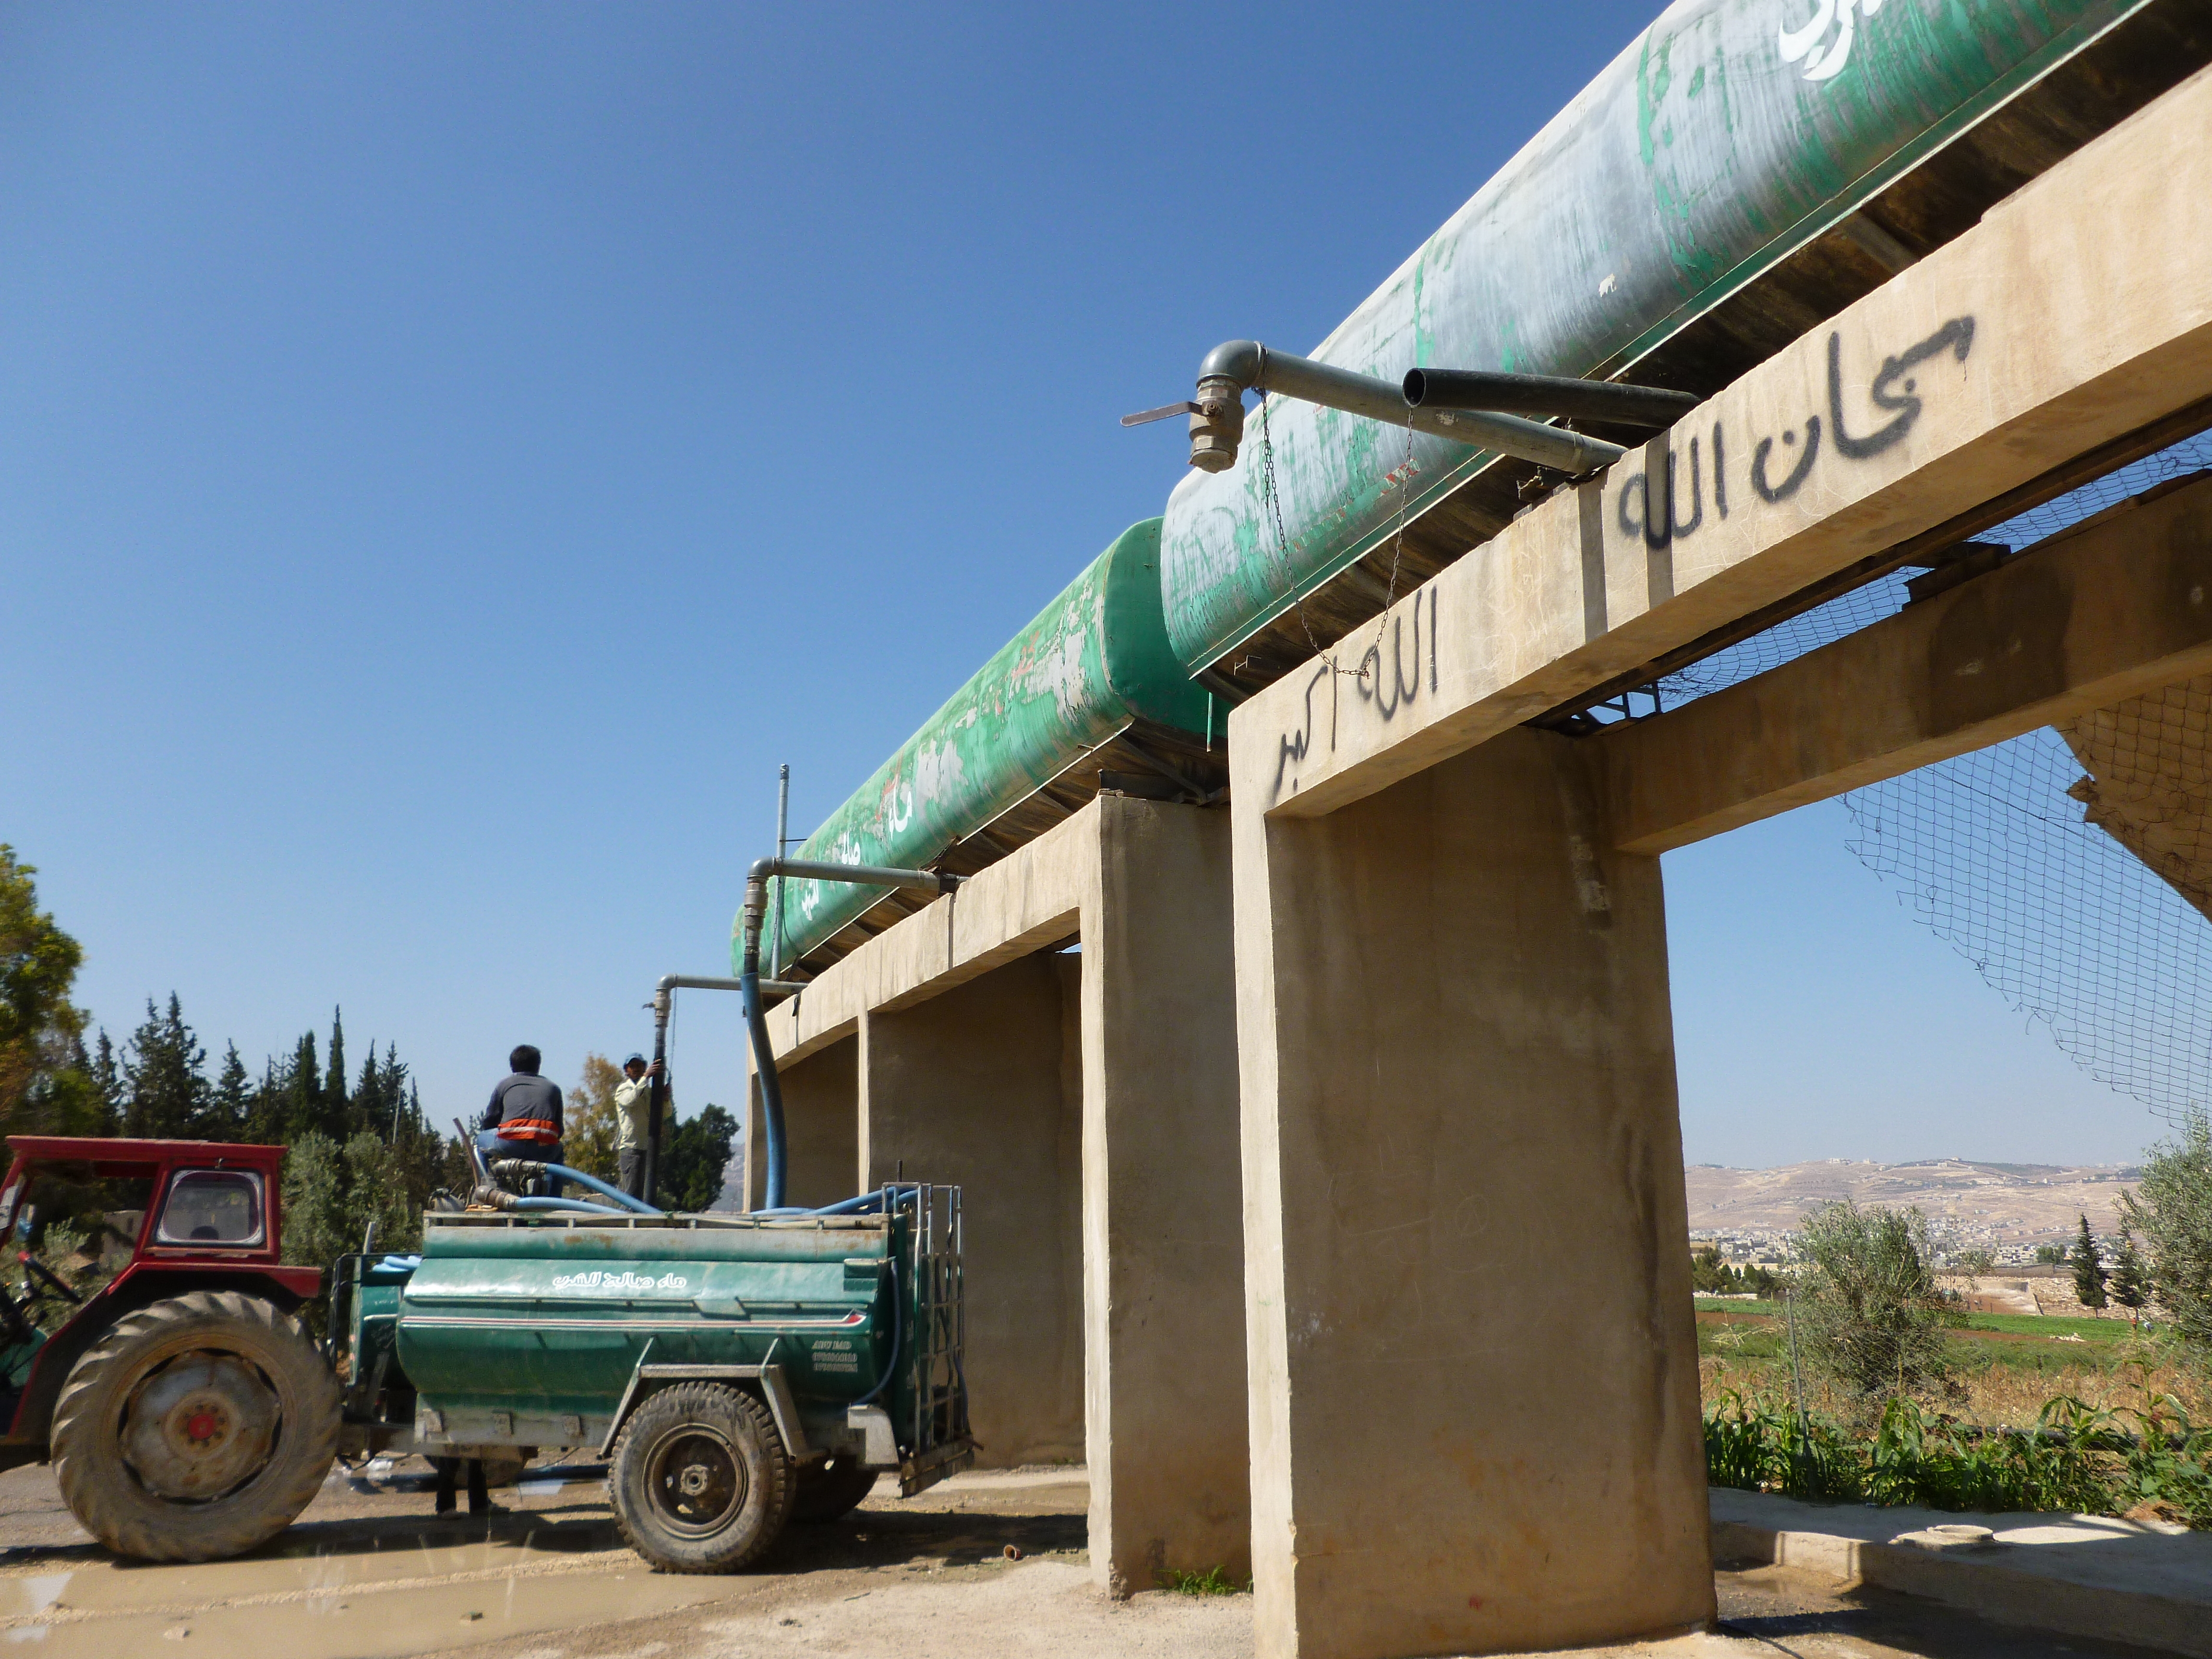 A water tanker being filled with water at a private well in Ayn Al Basha, Balqa Directorate, Jordan